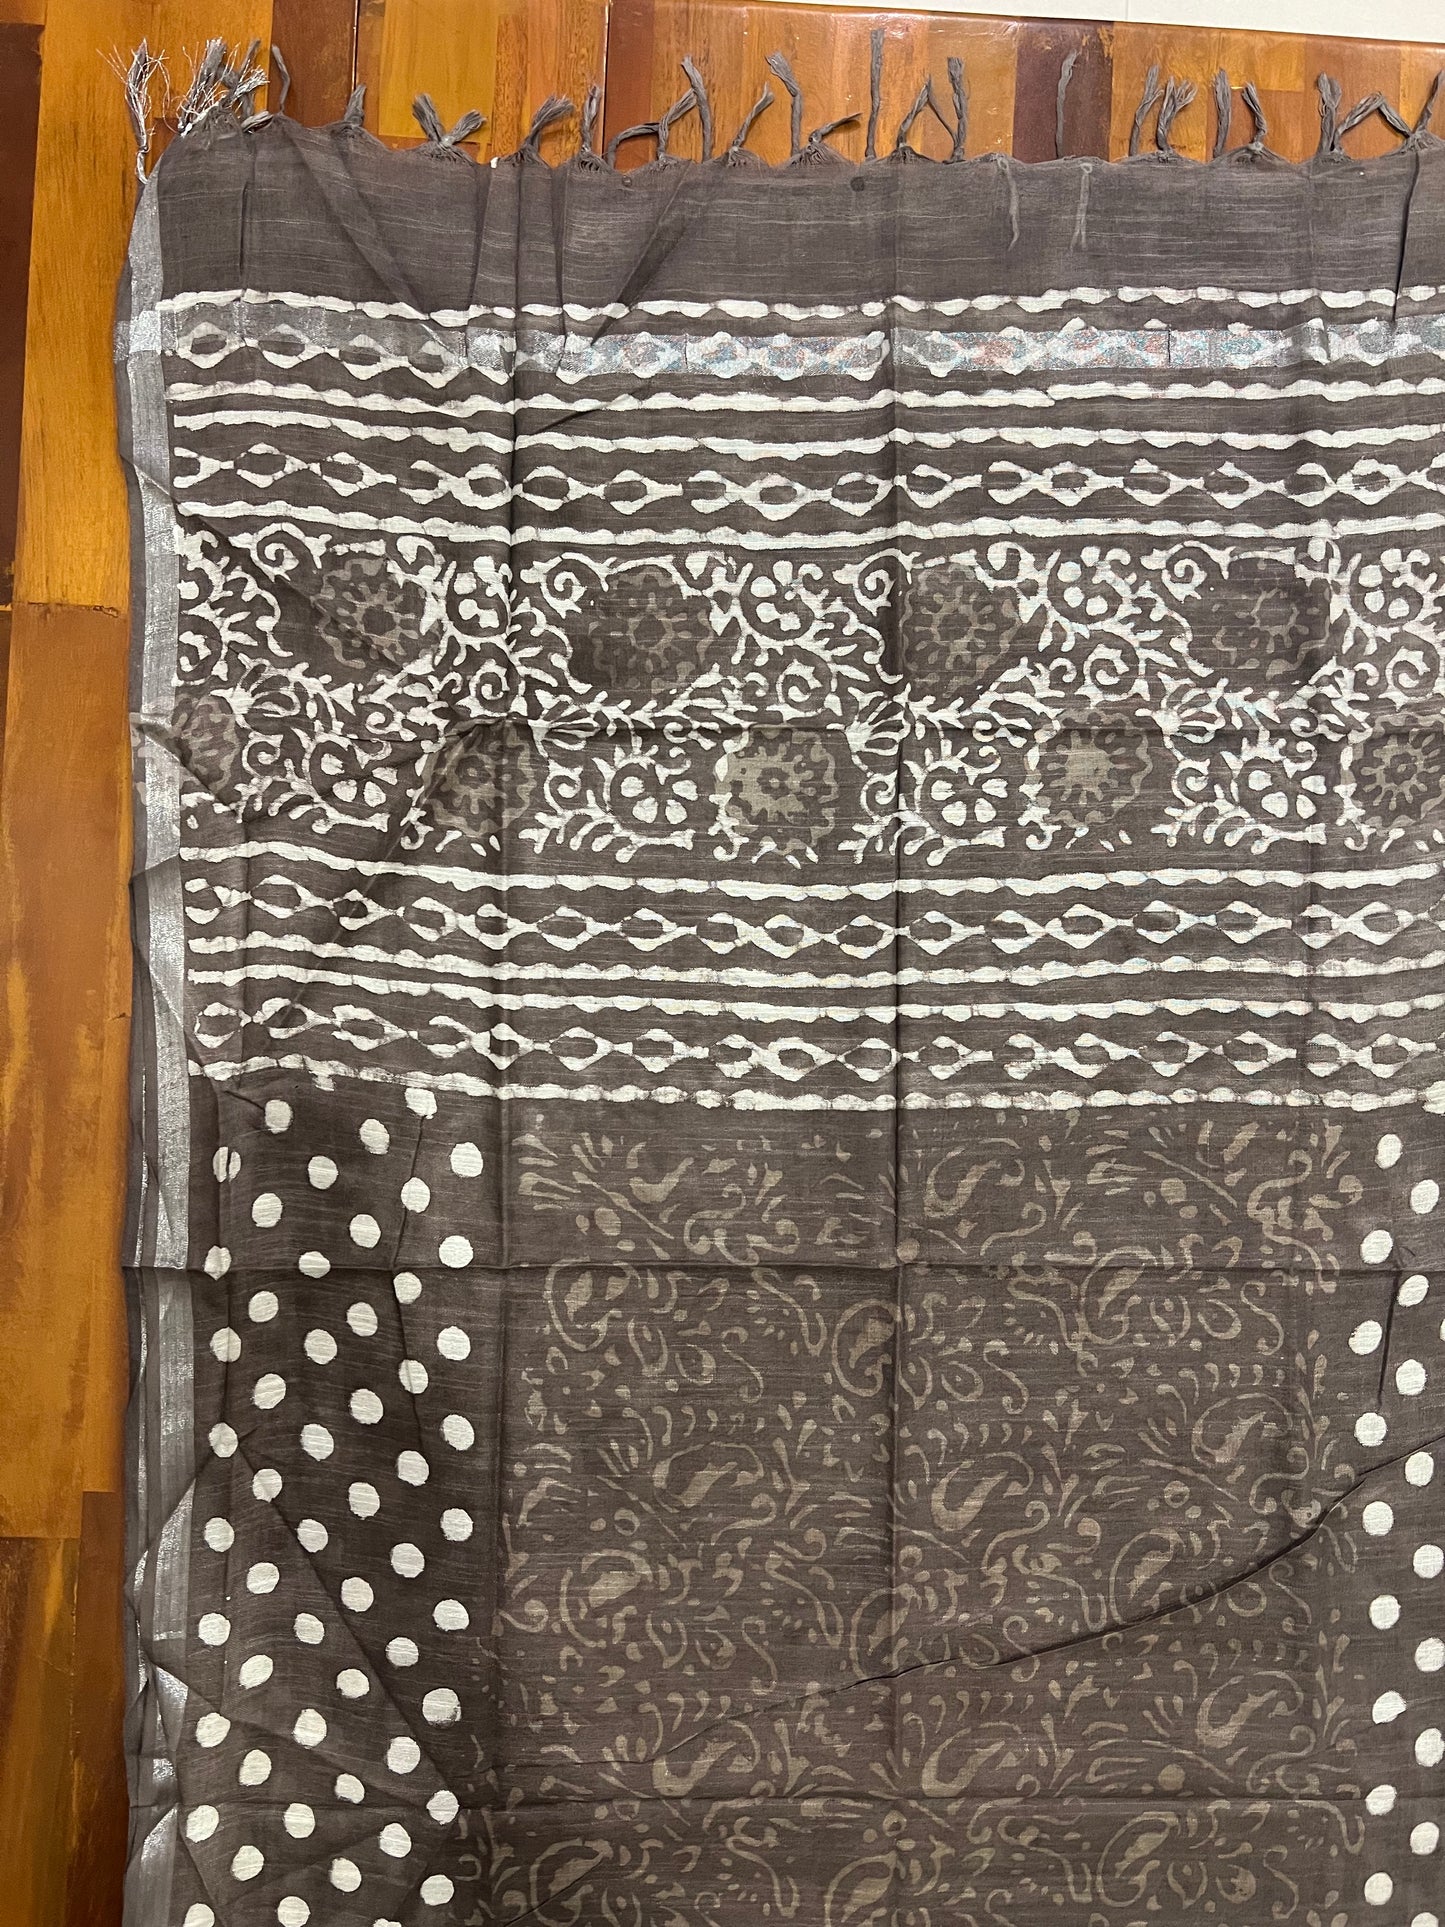 Southloom™ Cotton Churidar Salwar Suit Material in Brown with Prints